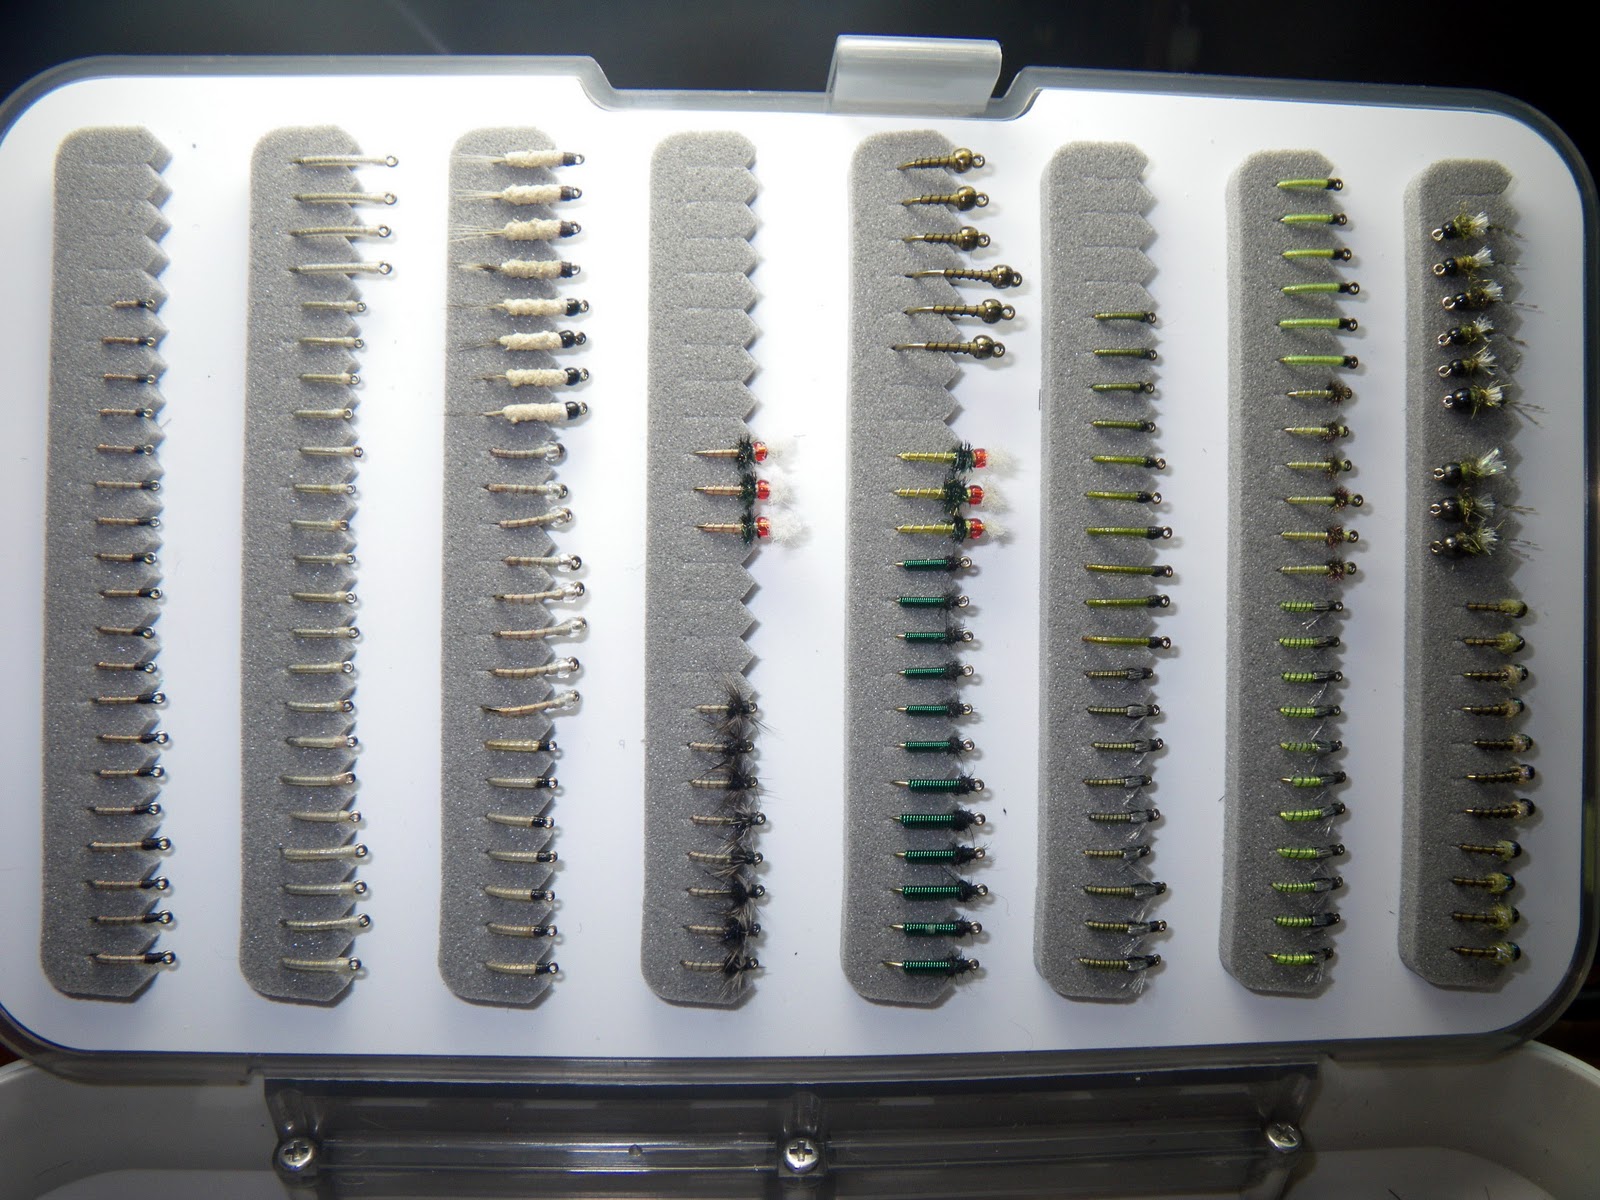 cp's fly fishing and fly tying: Fly Box Tour - Box #1 All things